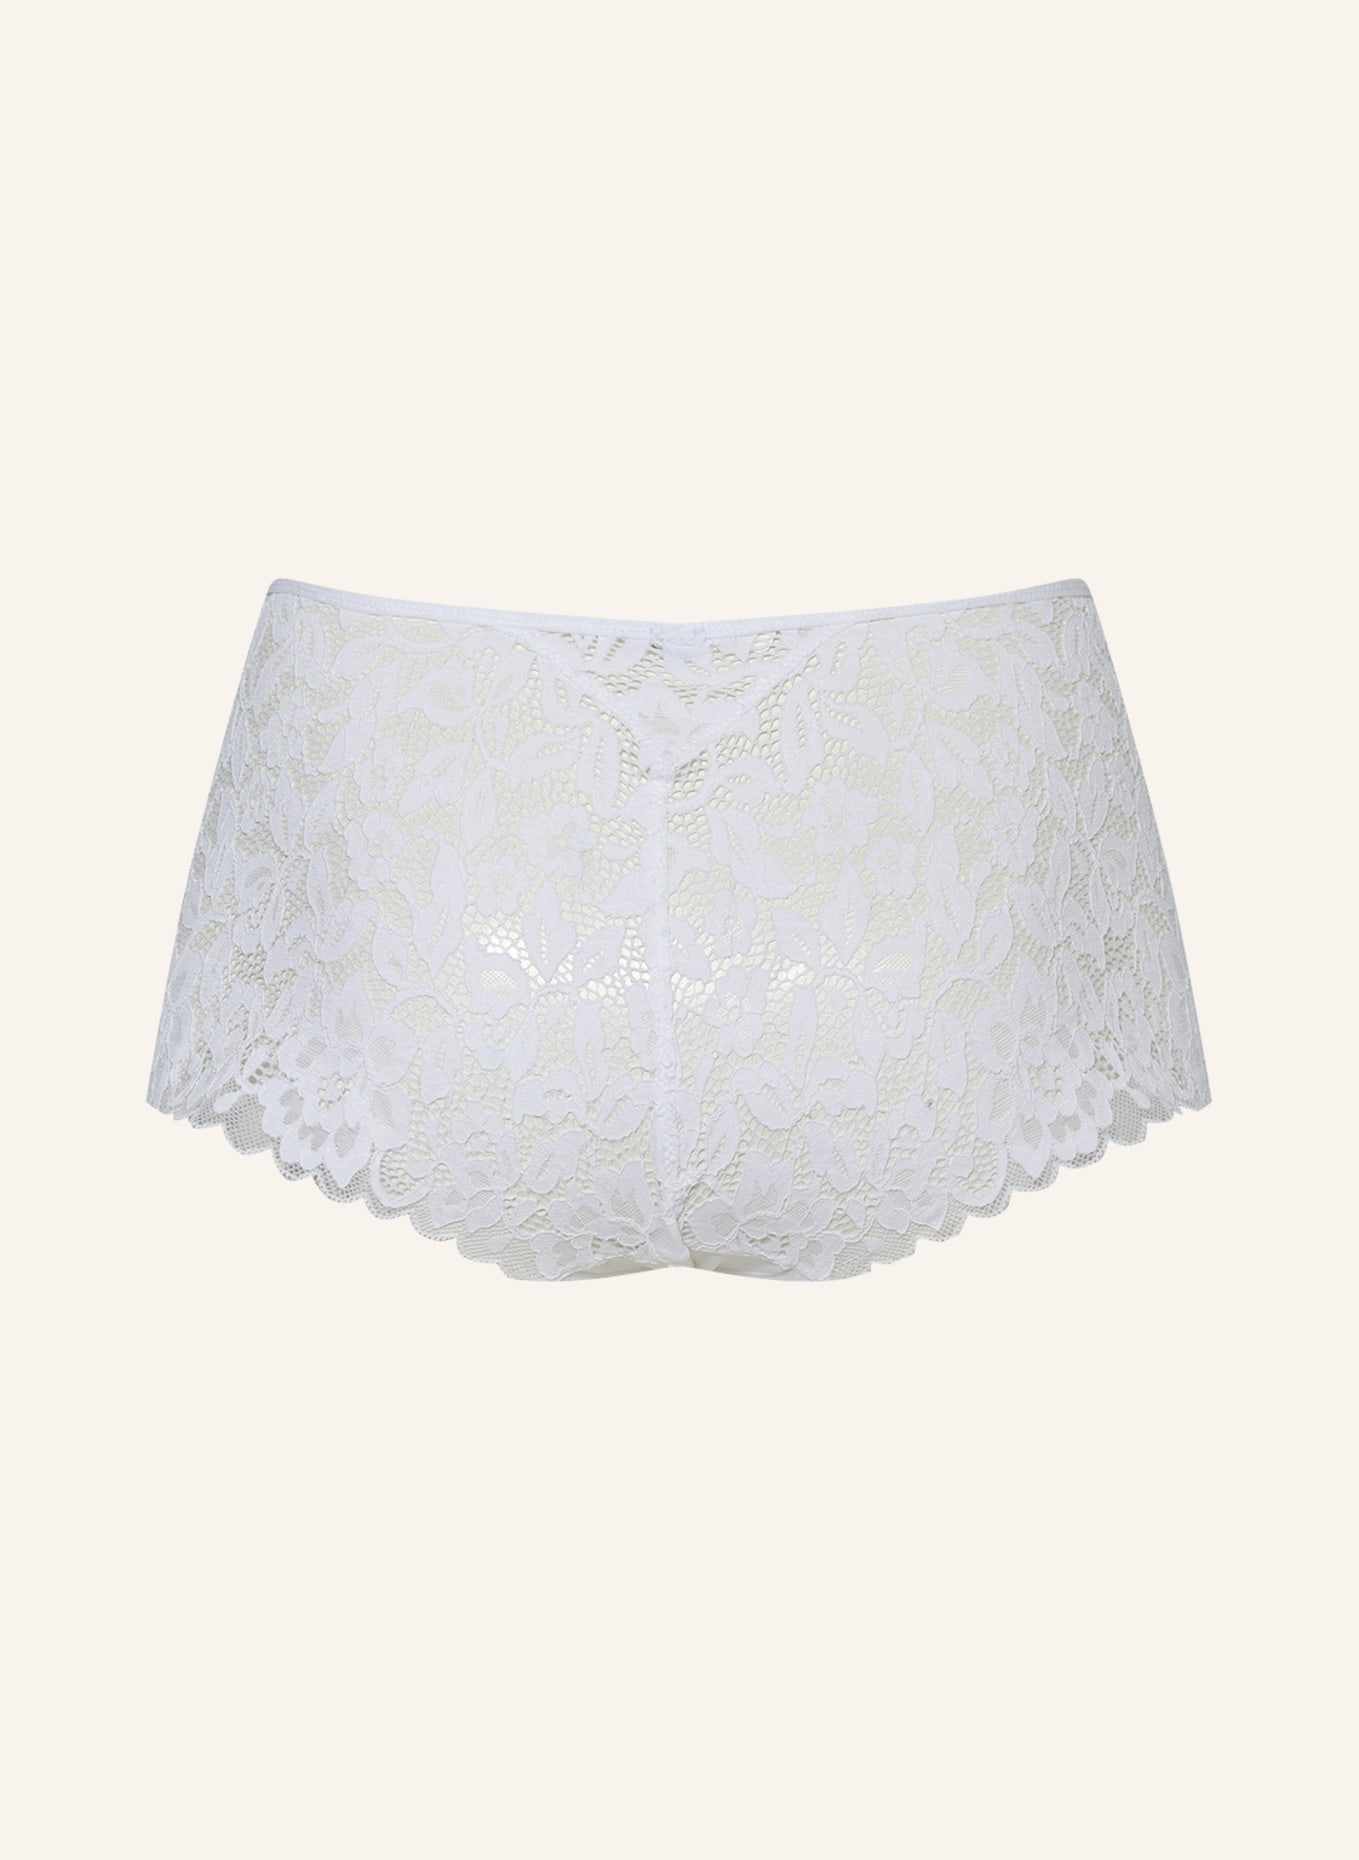 CALIDA Taillenpanty NATURAL COMFORT LACE, Farbe: WEISS (Bild 2)